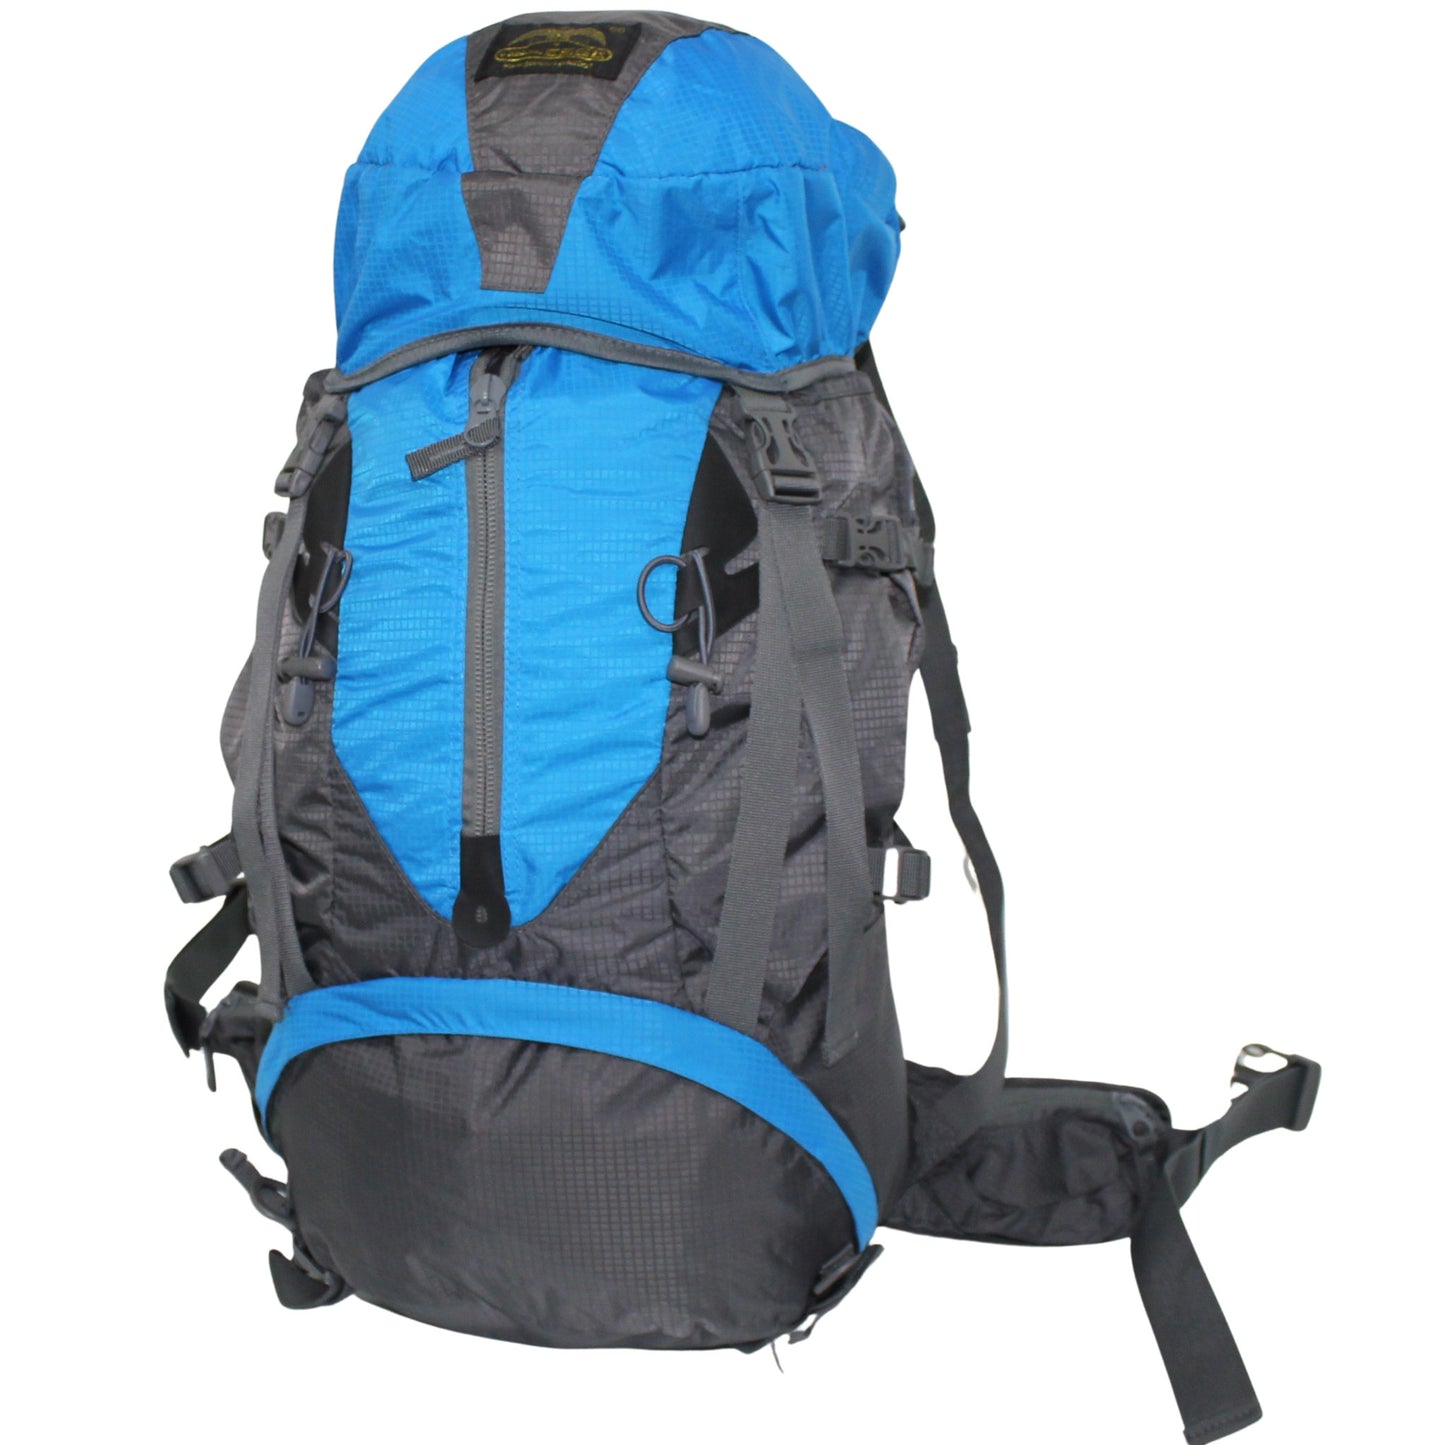 RU940 backpack with tensioned mesh back 35 L blue